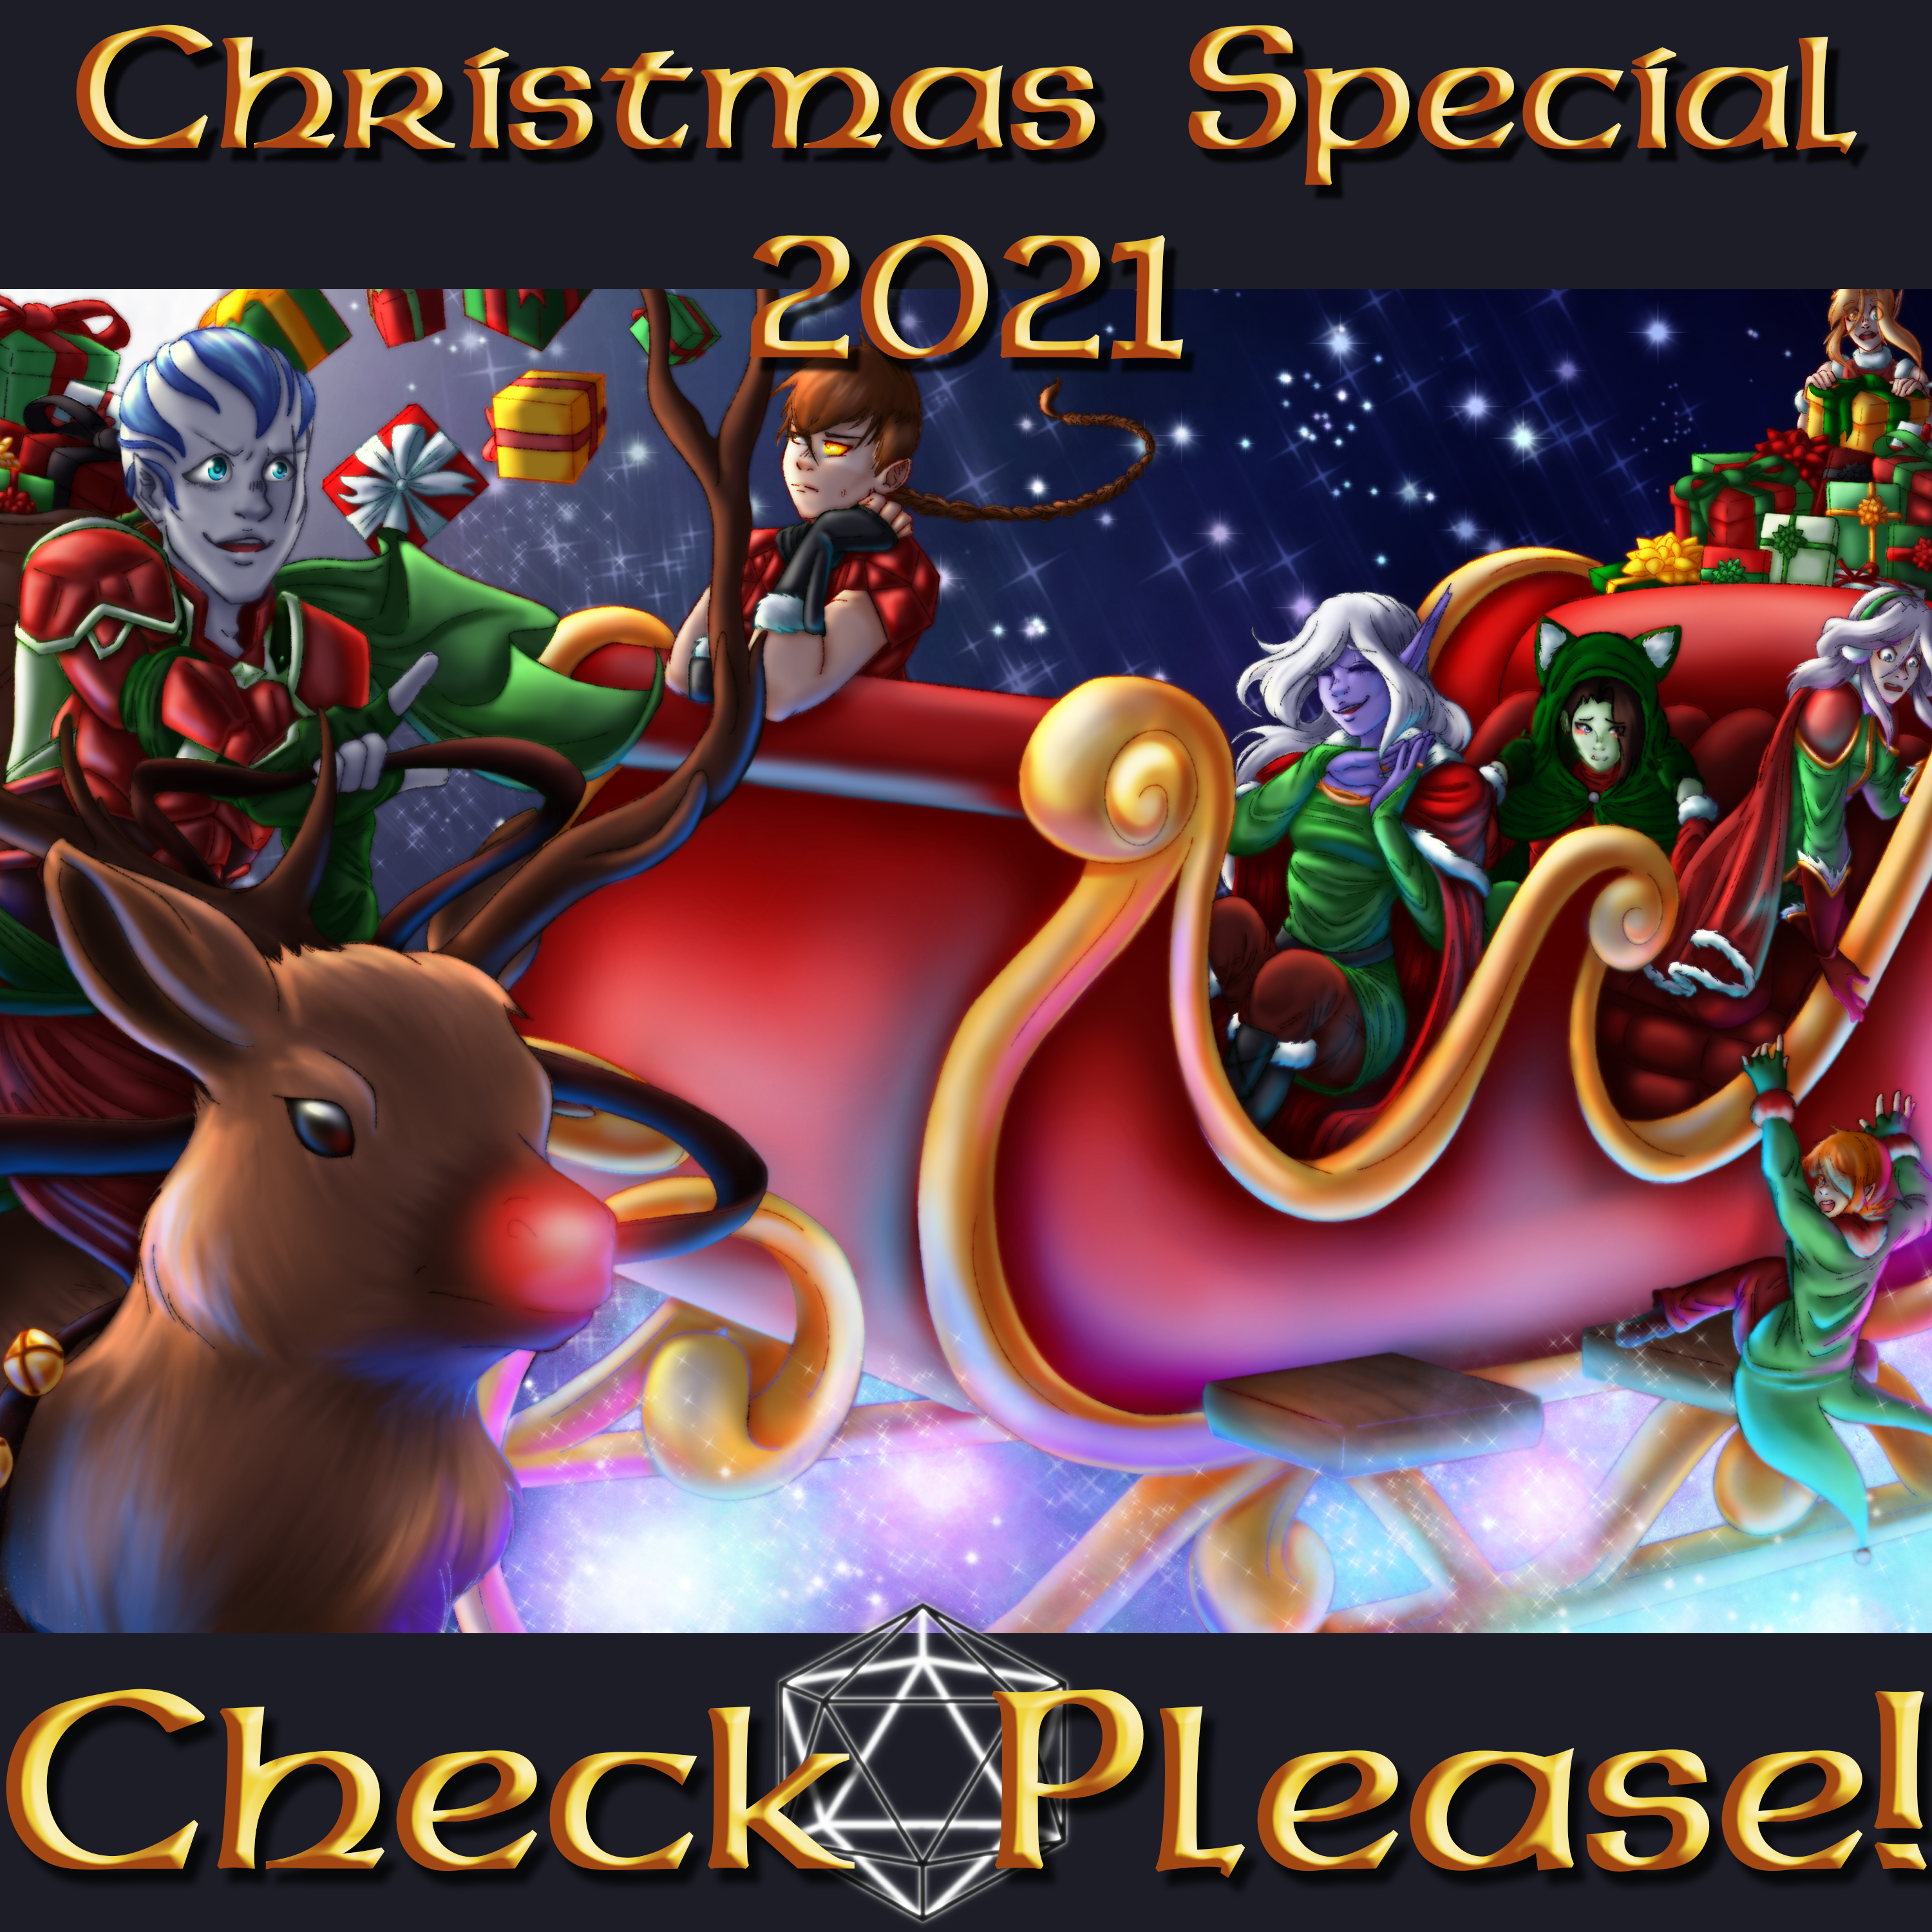 Check Please! Christmas Special 2021! Year without a Nicolaus